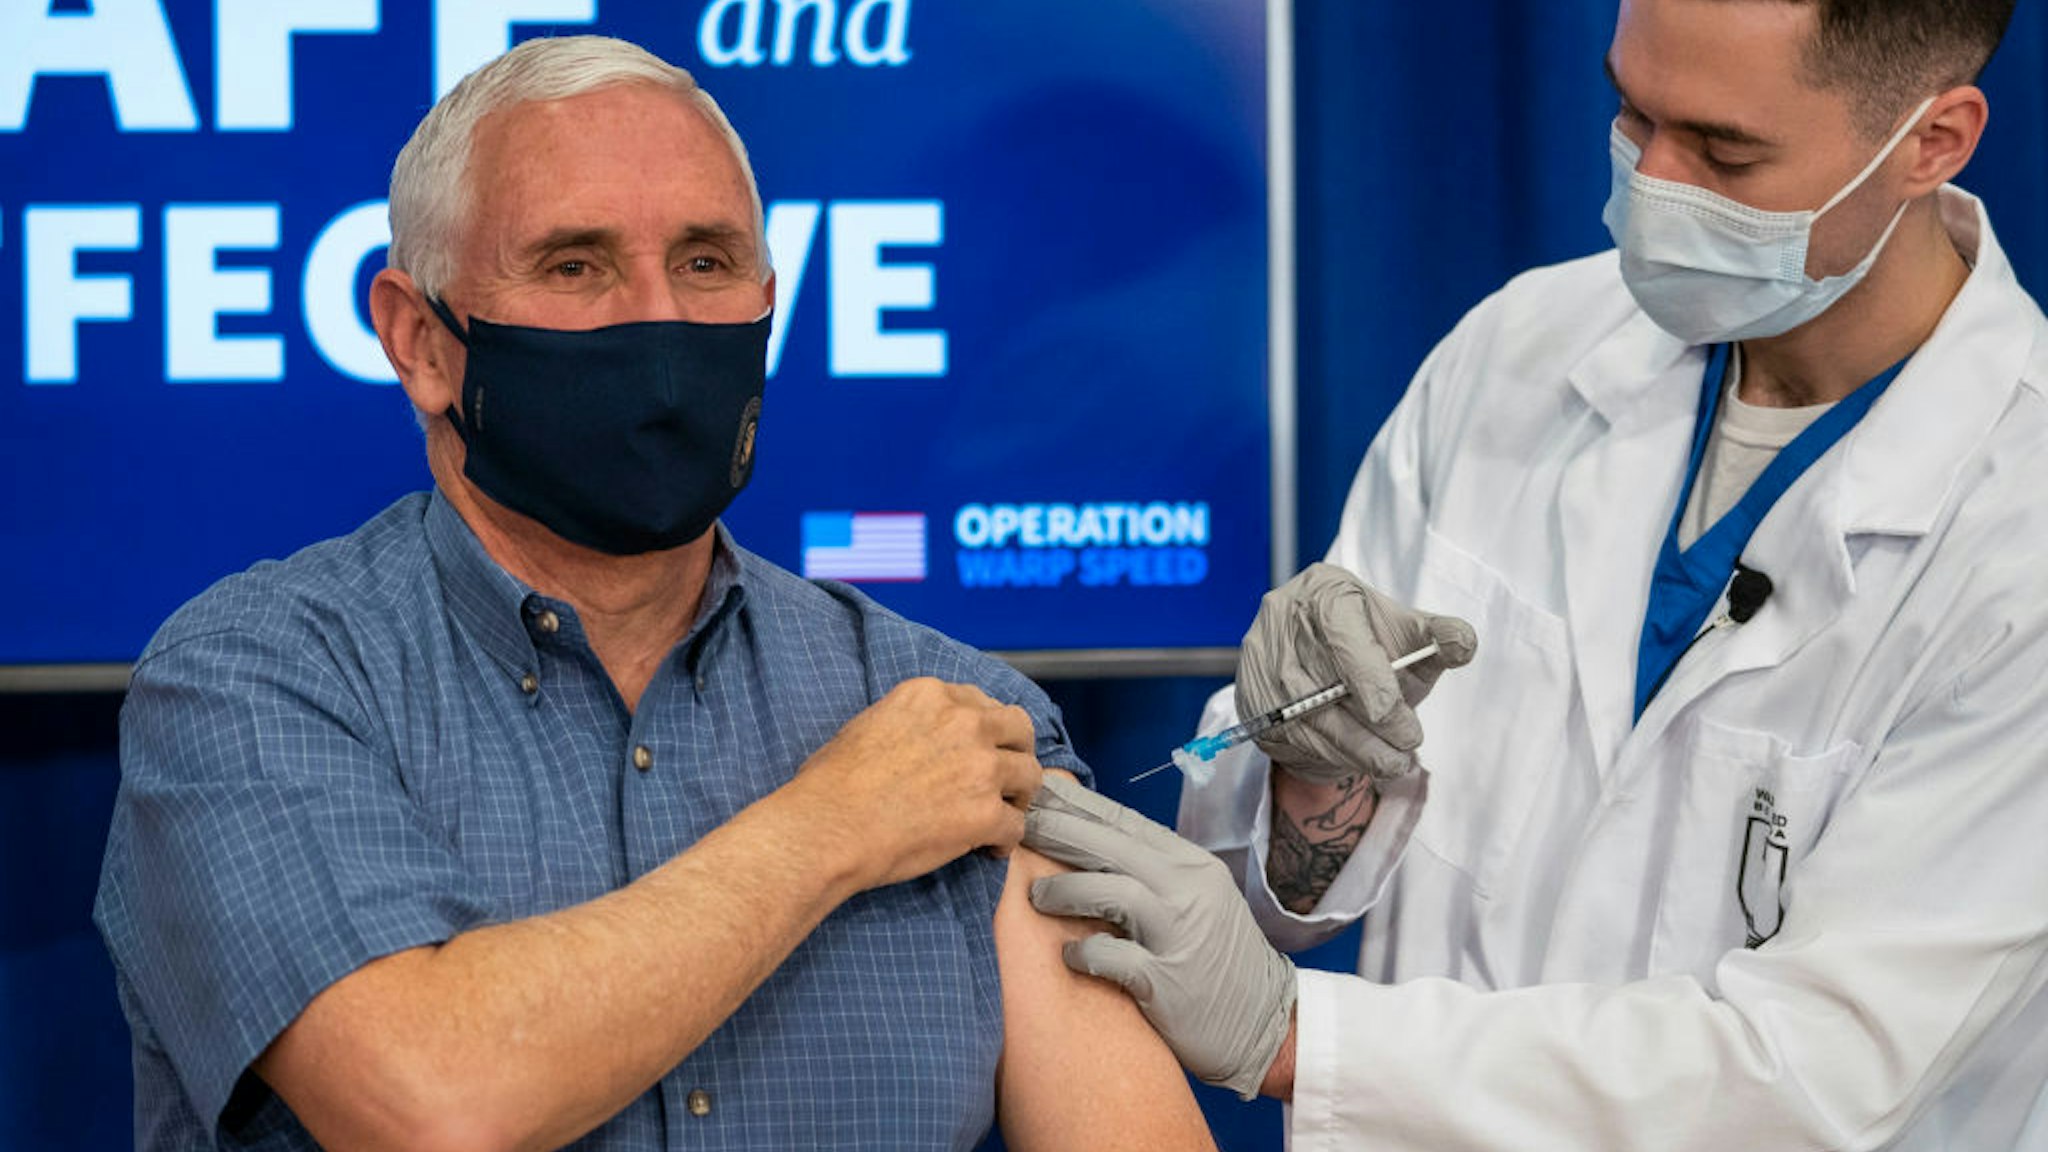 Vice President Pence Receives Covid Vaccination At The White House